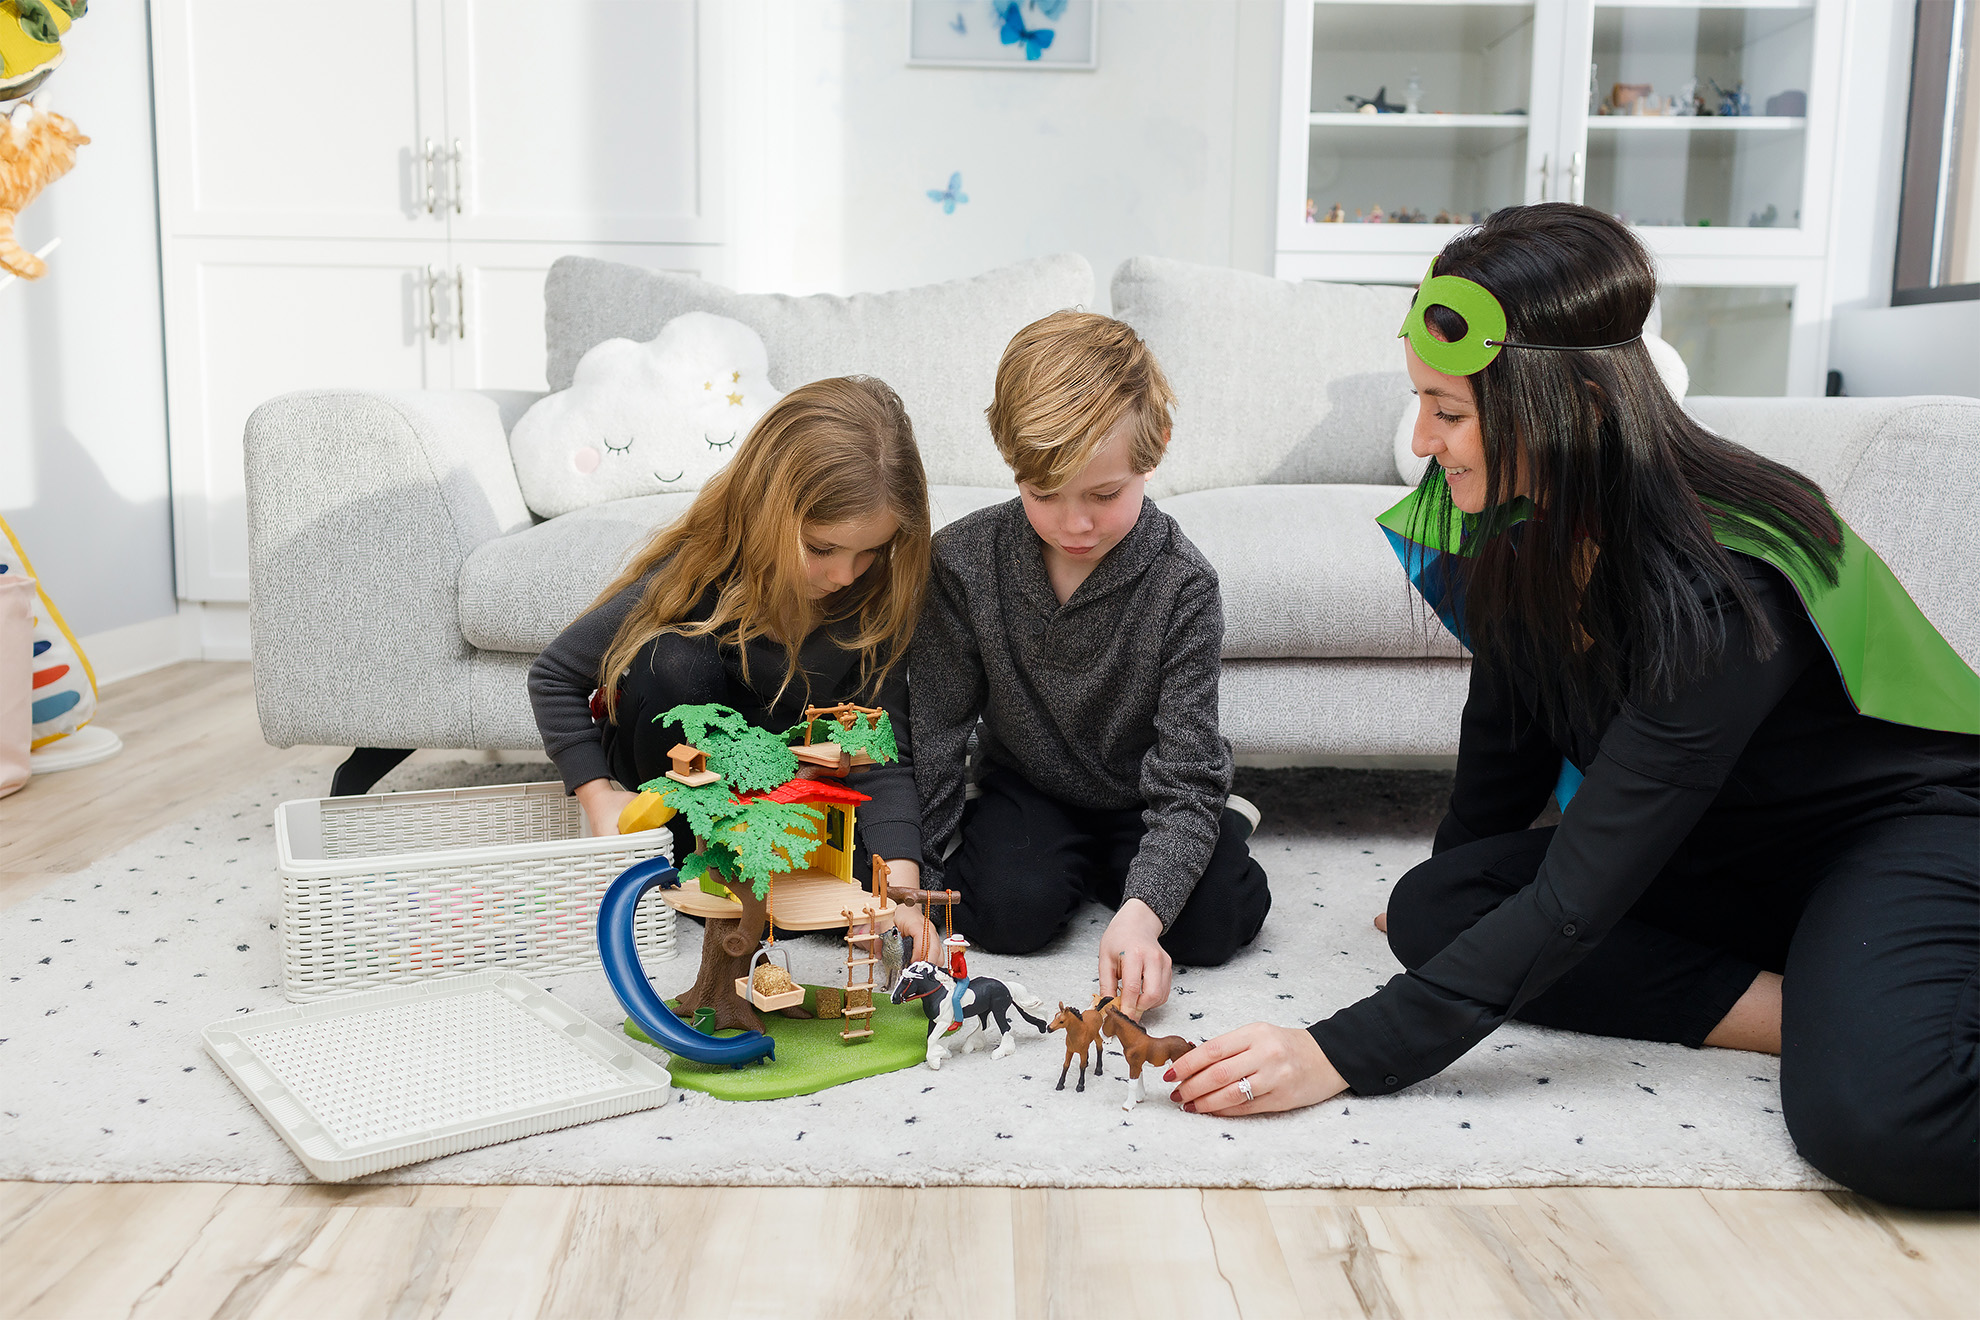 A child therapist wearing a Superhero cape in a play therapy session with two kids, a girl and a boy. They are sitting on a playroom rug, playing with a tree house toy and toy horse figures.